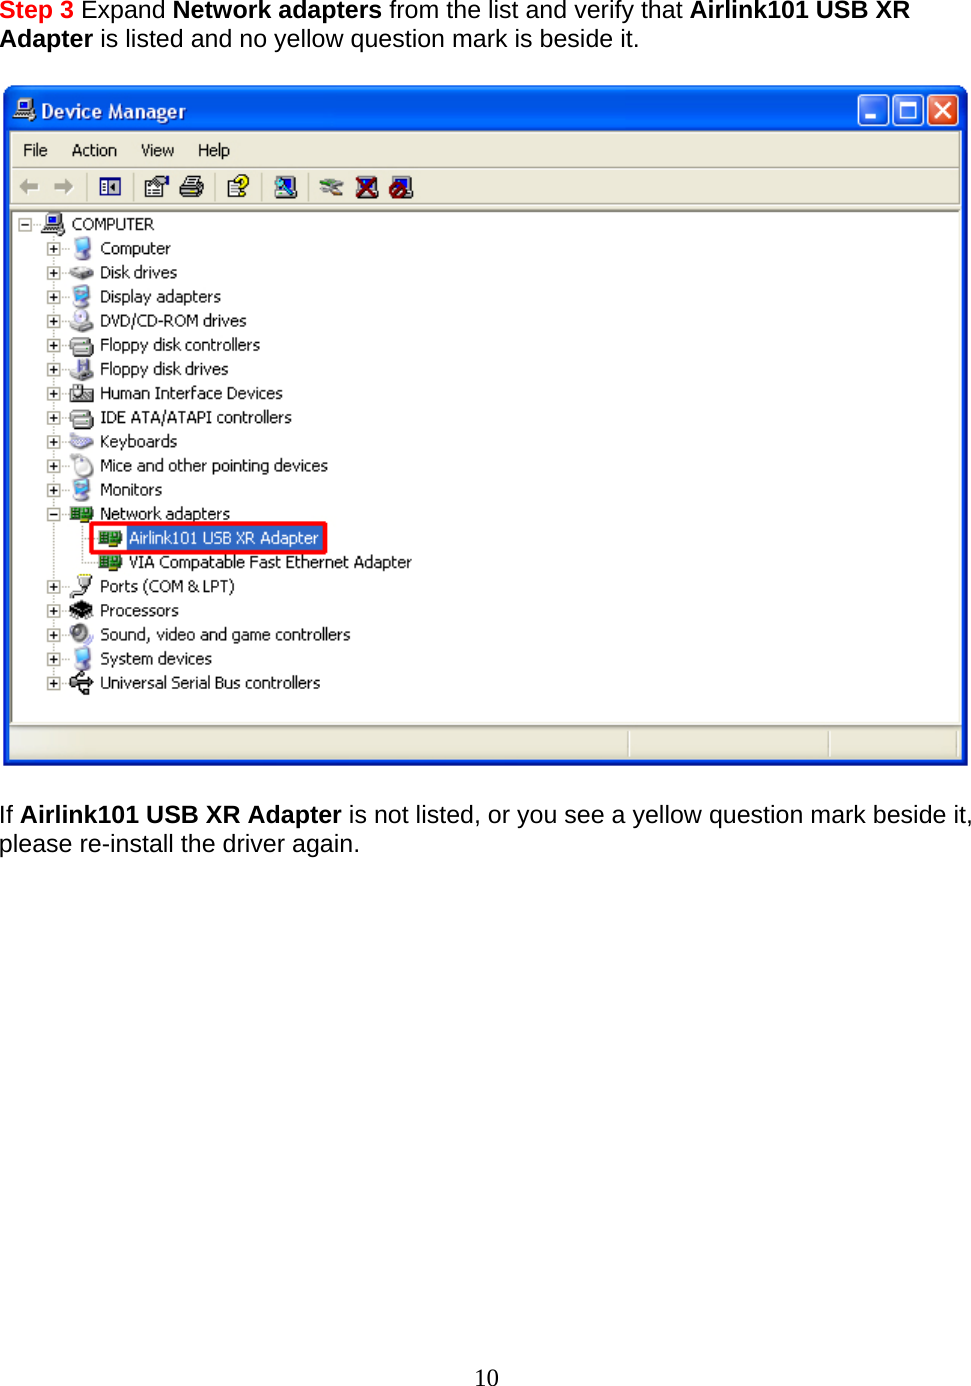 10  Step 3 Expand Network adapters from the list and verify that Airlink101 USB XR Adapter is listed and no yellow question mark is beside it.    If Airlink101 USB XR Adapter is not listed, or you see a yellow question mark beside it, please re-install the driver again.                